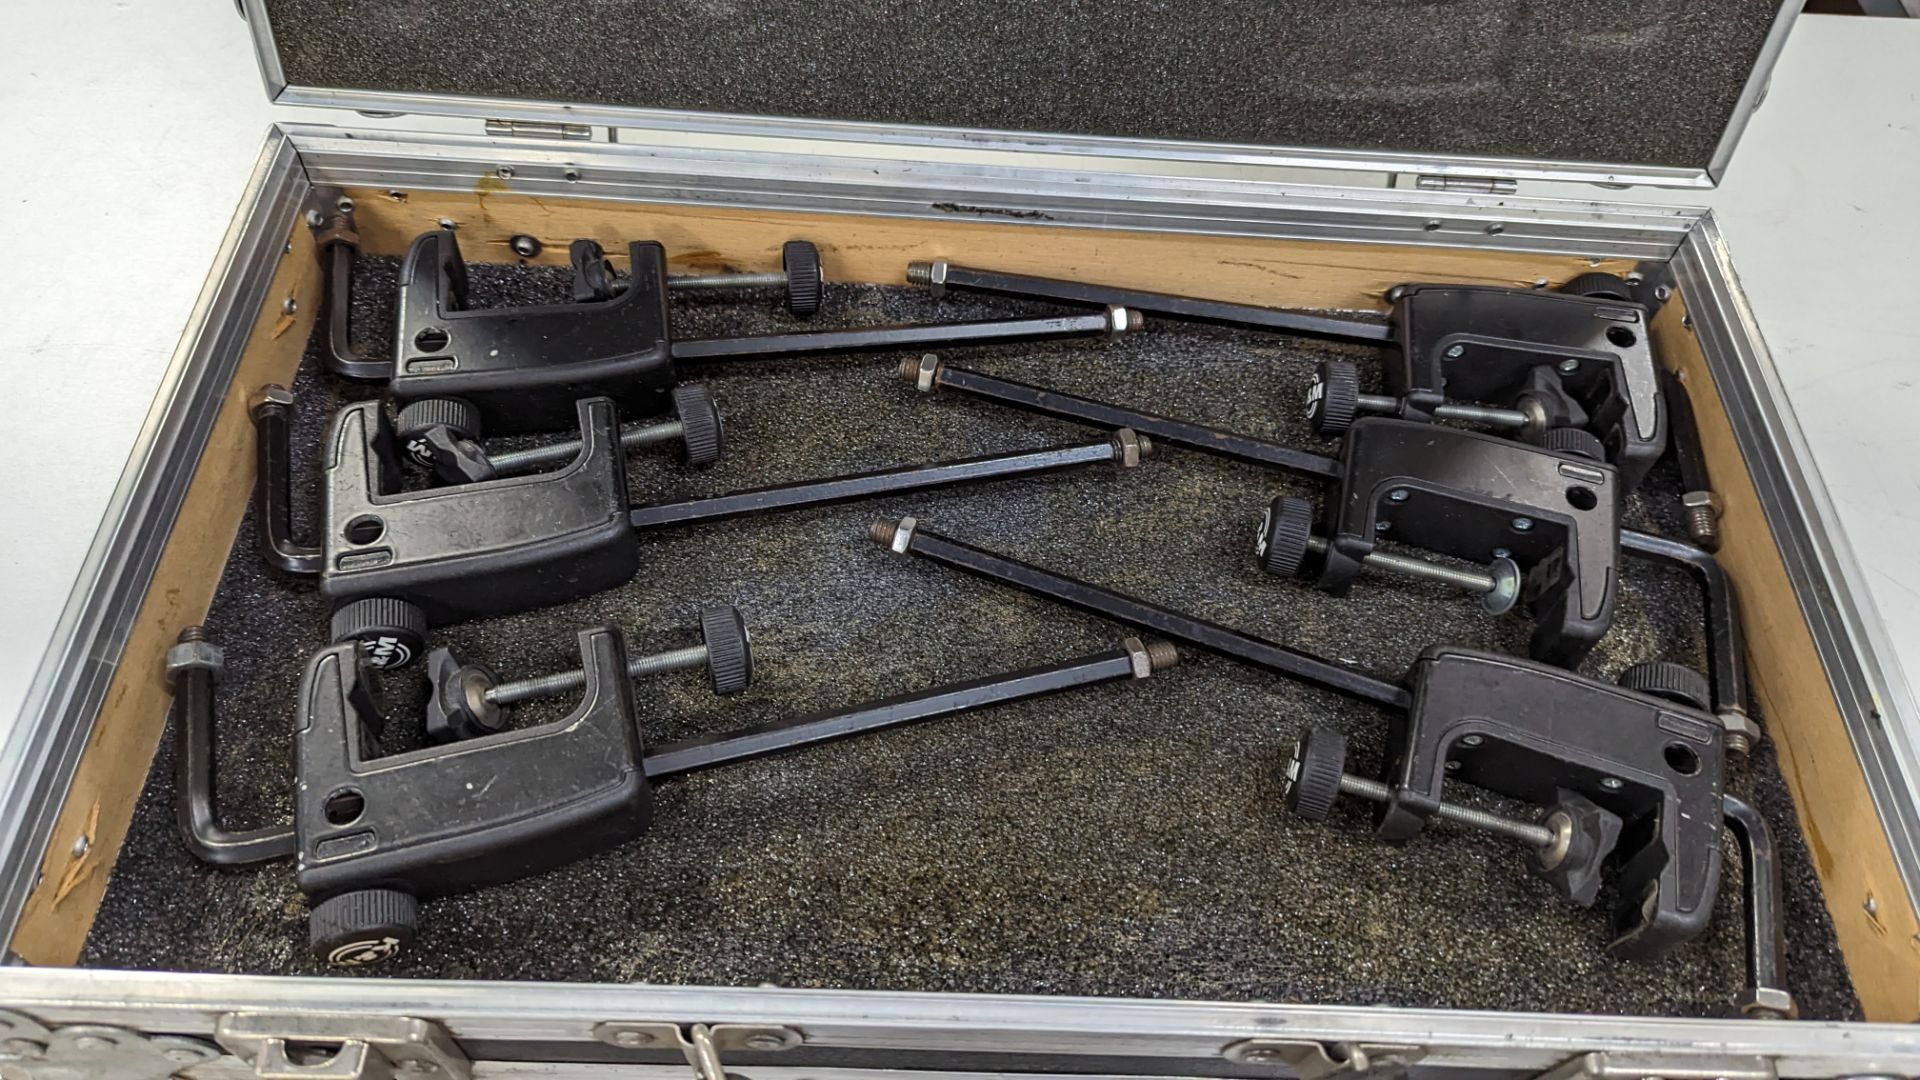 12 off K&M model 240/5 universal microphone holders. Including flight case. Total lot weight: 12kg - Image 7 of 10